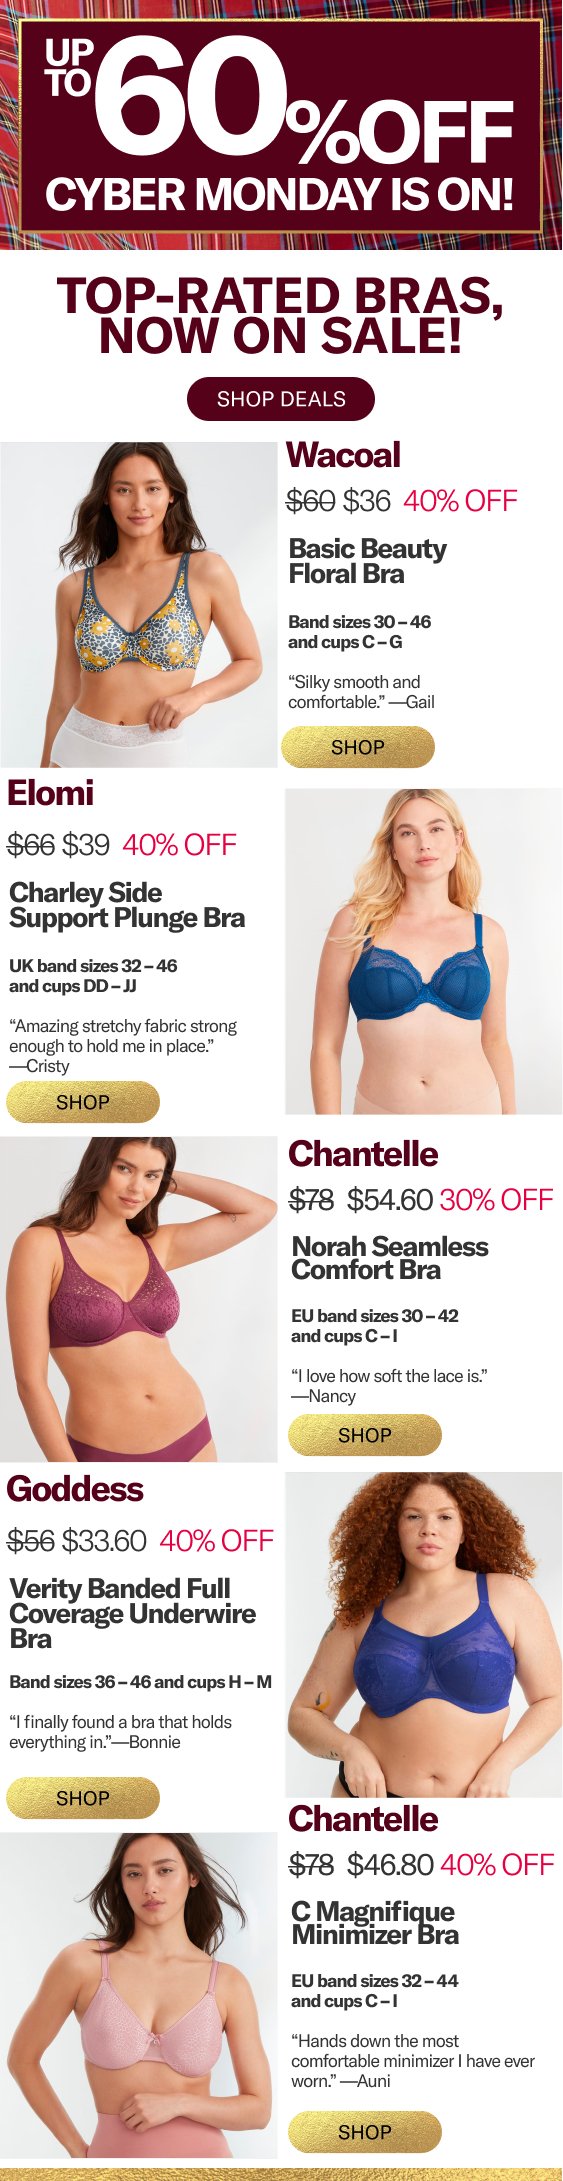 Top Picks, Top Discounts: 60% Off Our Most-Loved Bras - Bare